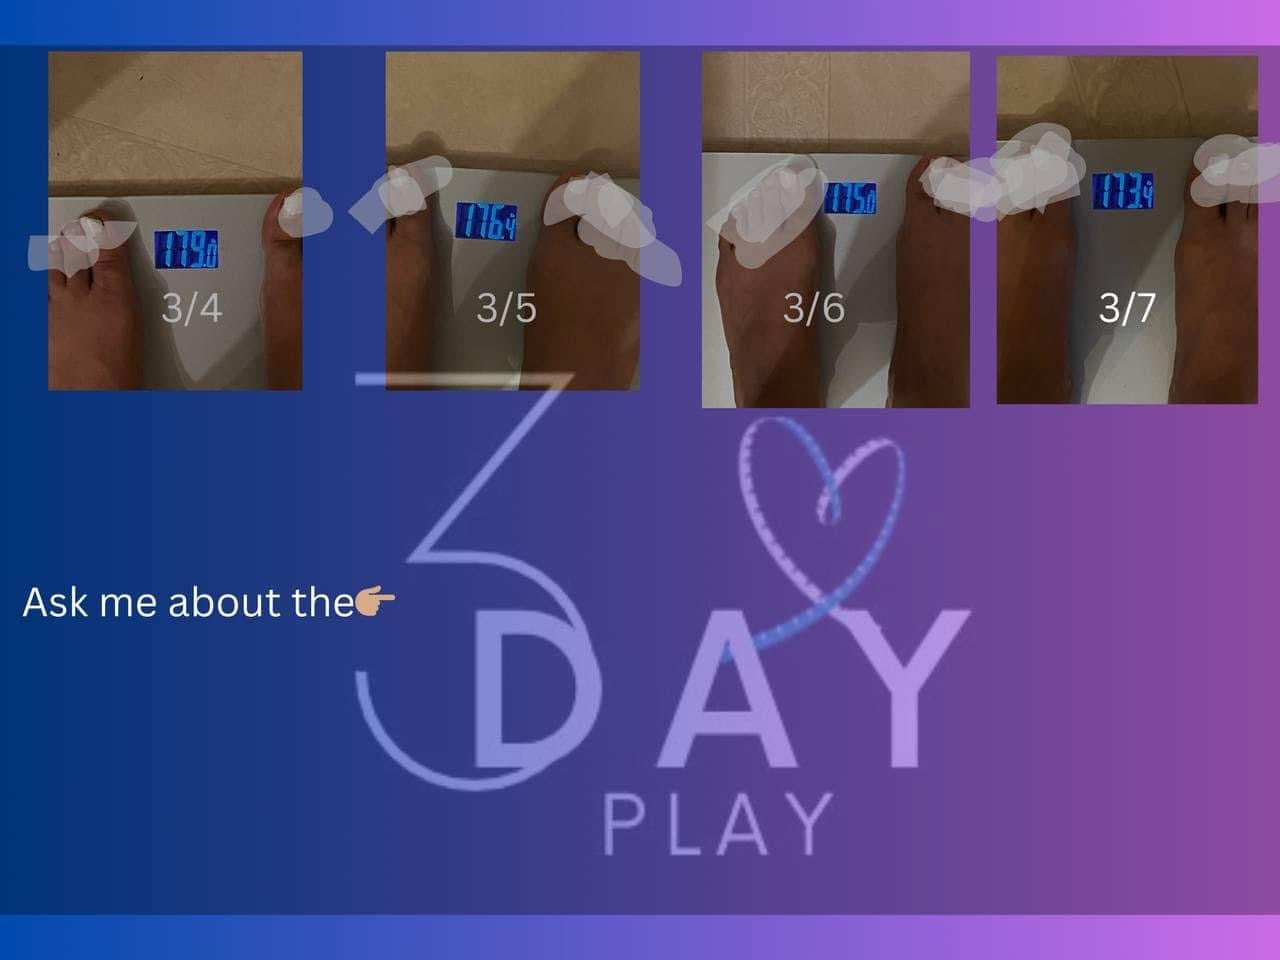 3 Day Play